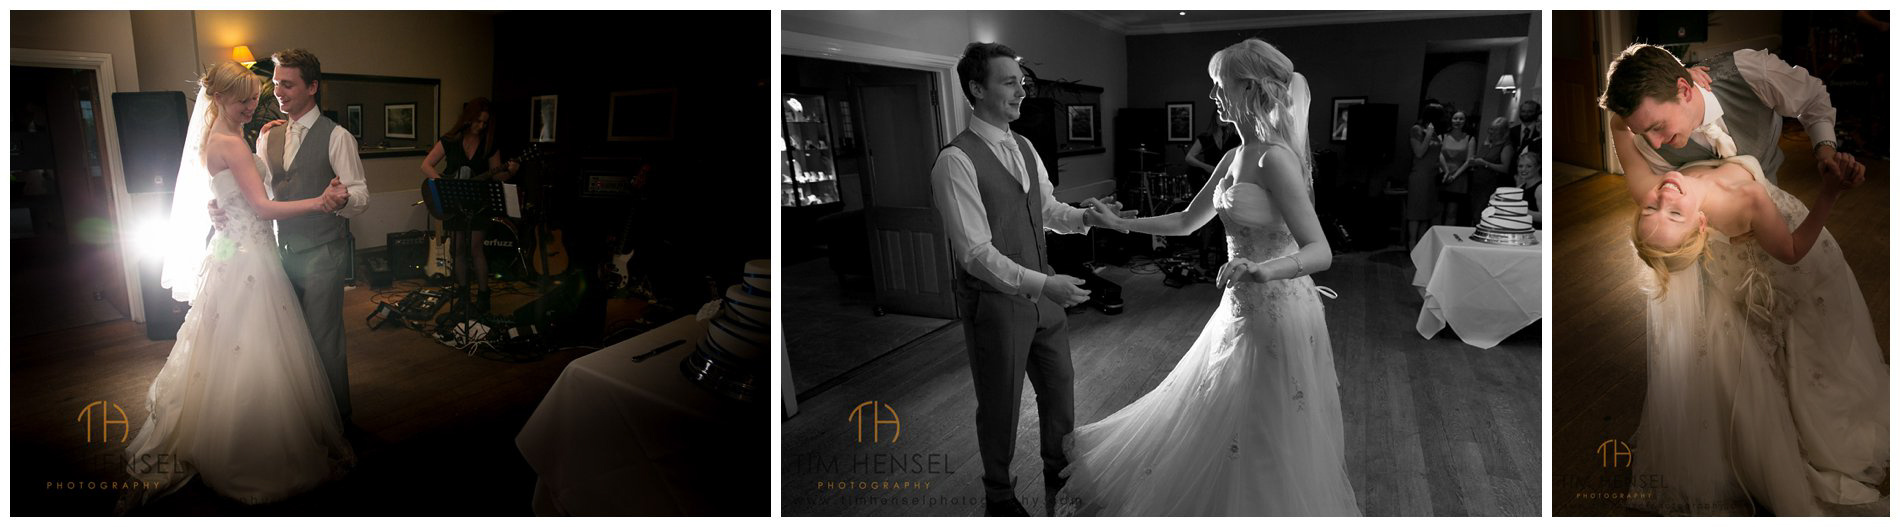 First Dance Wedding Photos at Losehill House in the Peak District